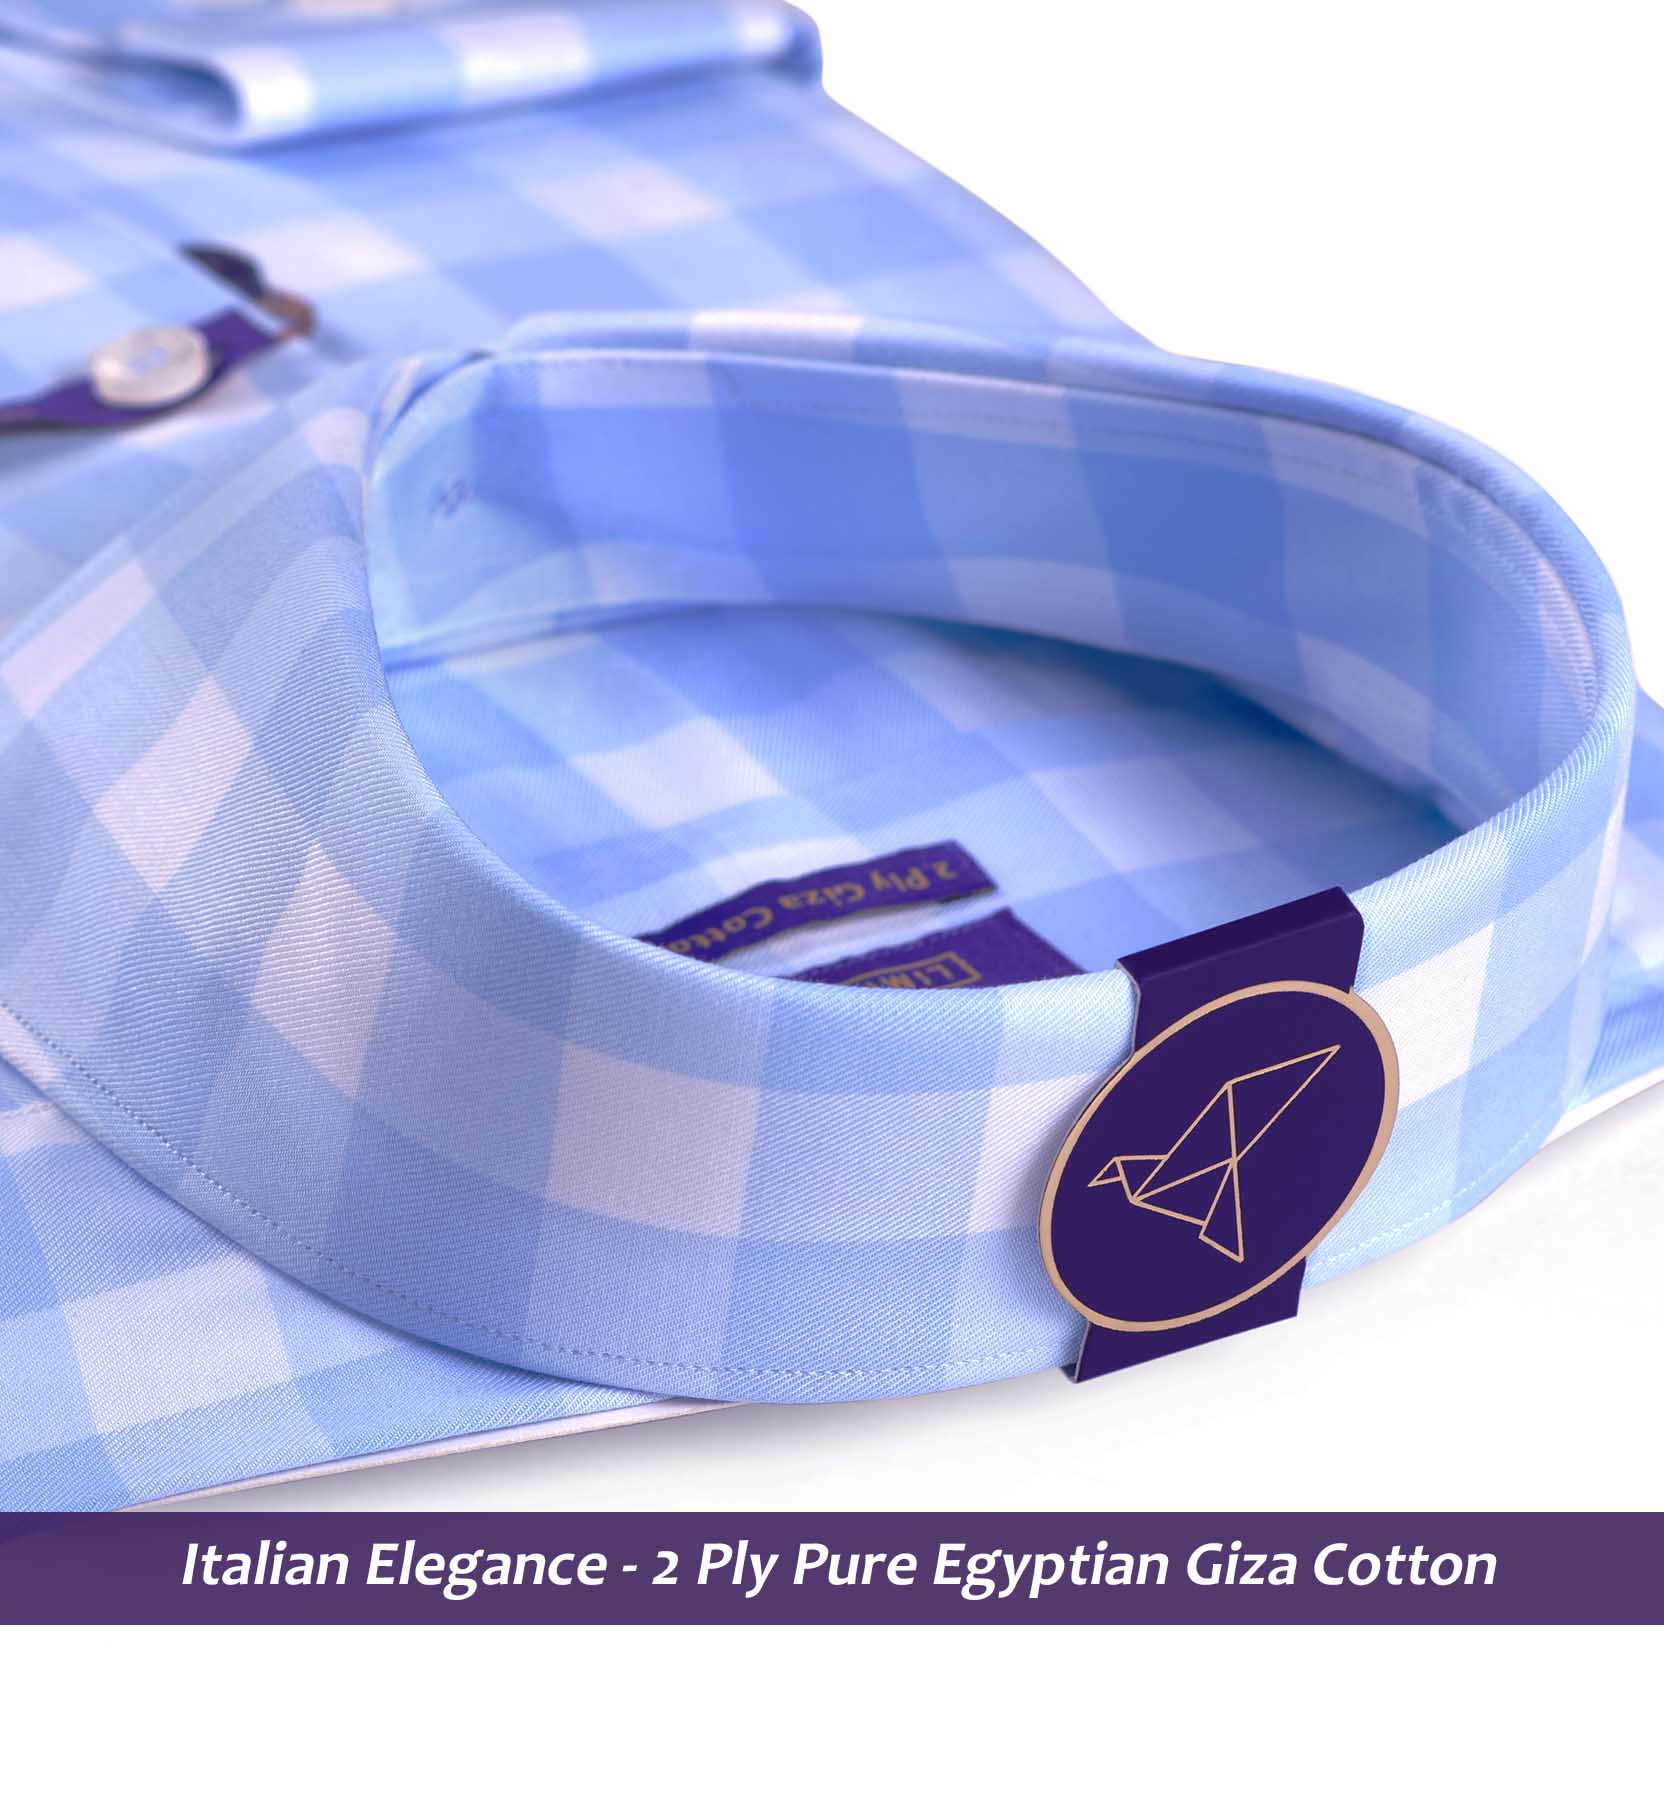 Men's shirt in Oxford Blue & White Magical Check - Shirts for men